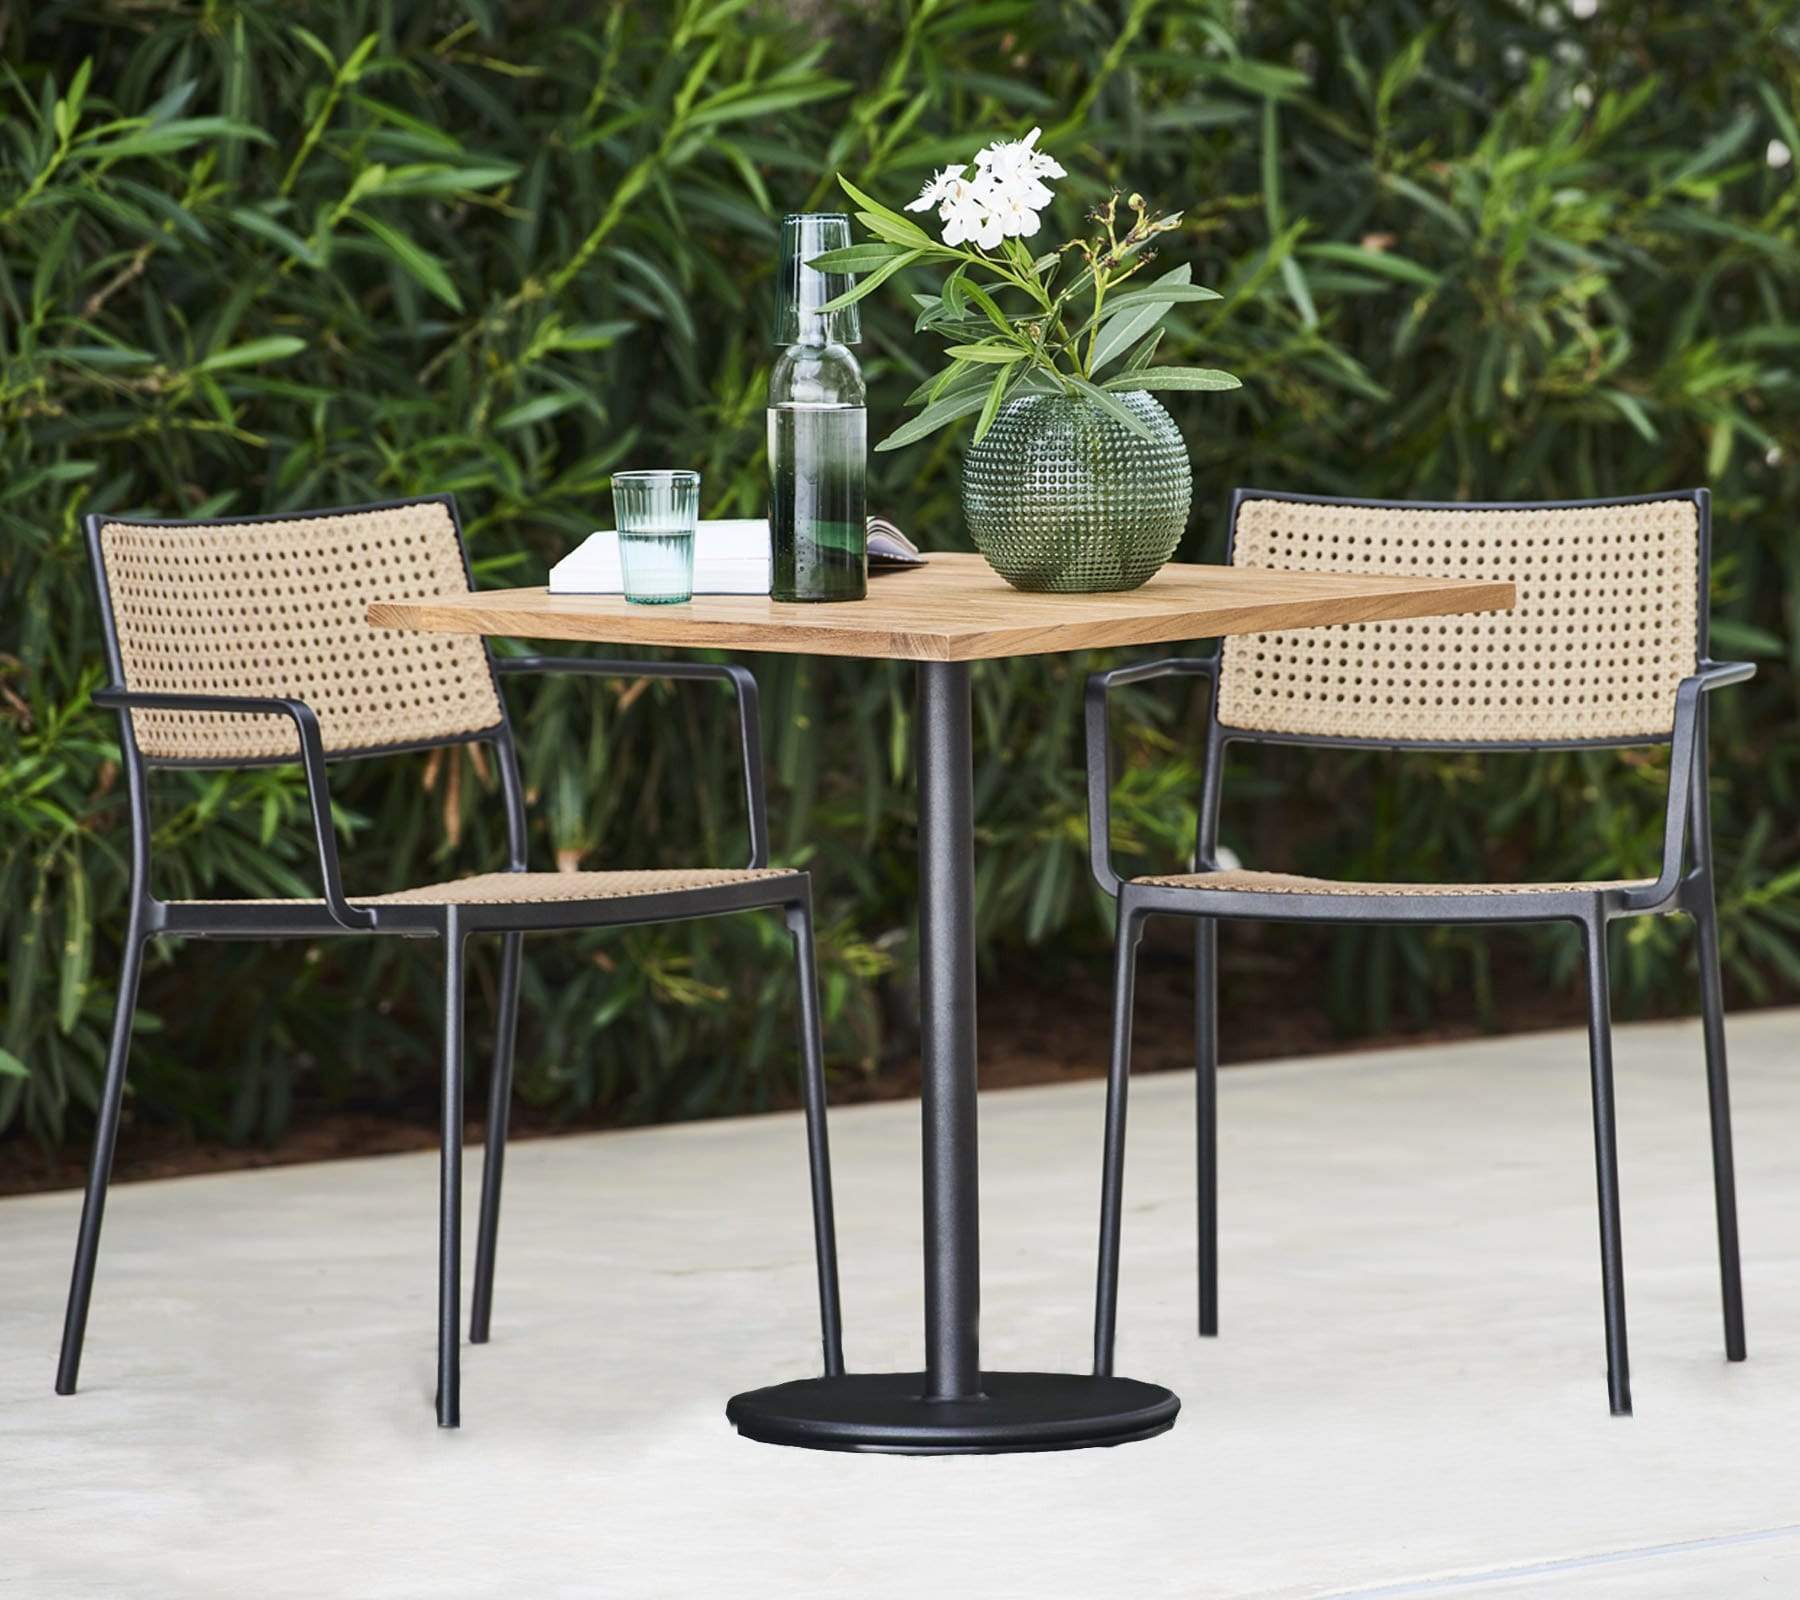 Boxhill's Go Outdoor Square Teak Café Table lifestyle image wih glass of water, bottle water container and a plant in a round vase on top, and 2 dining chairs near the plants at patio